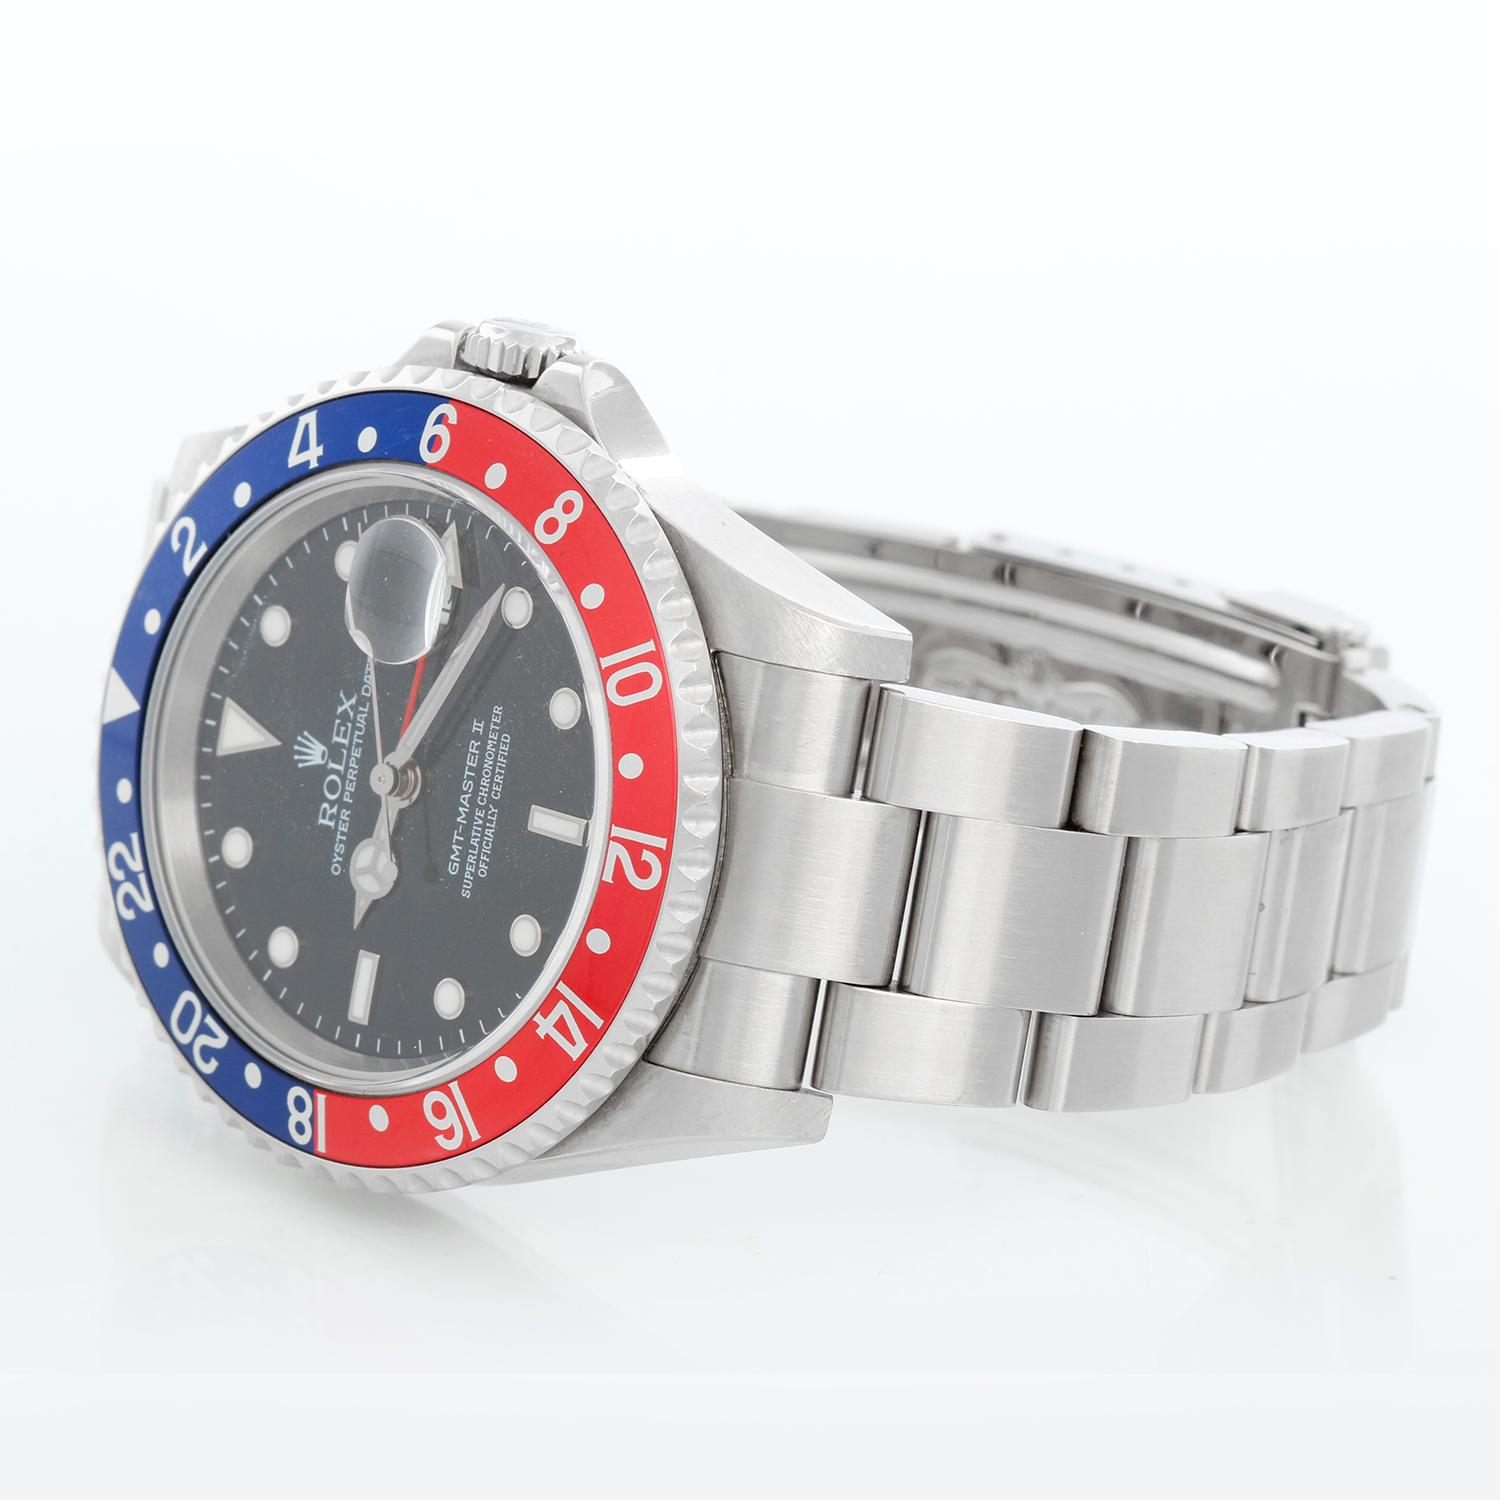 Men's Rolex GMT-Master II Watch 16710 - Automatic winding, 31 jewels, Quickset, sapphire crystal. Stainless steel case; rotating bezel with red/black bezel . Black dial with luminous style markers. Stainless steel Oyster bracelet. Pre-Owned